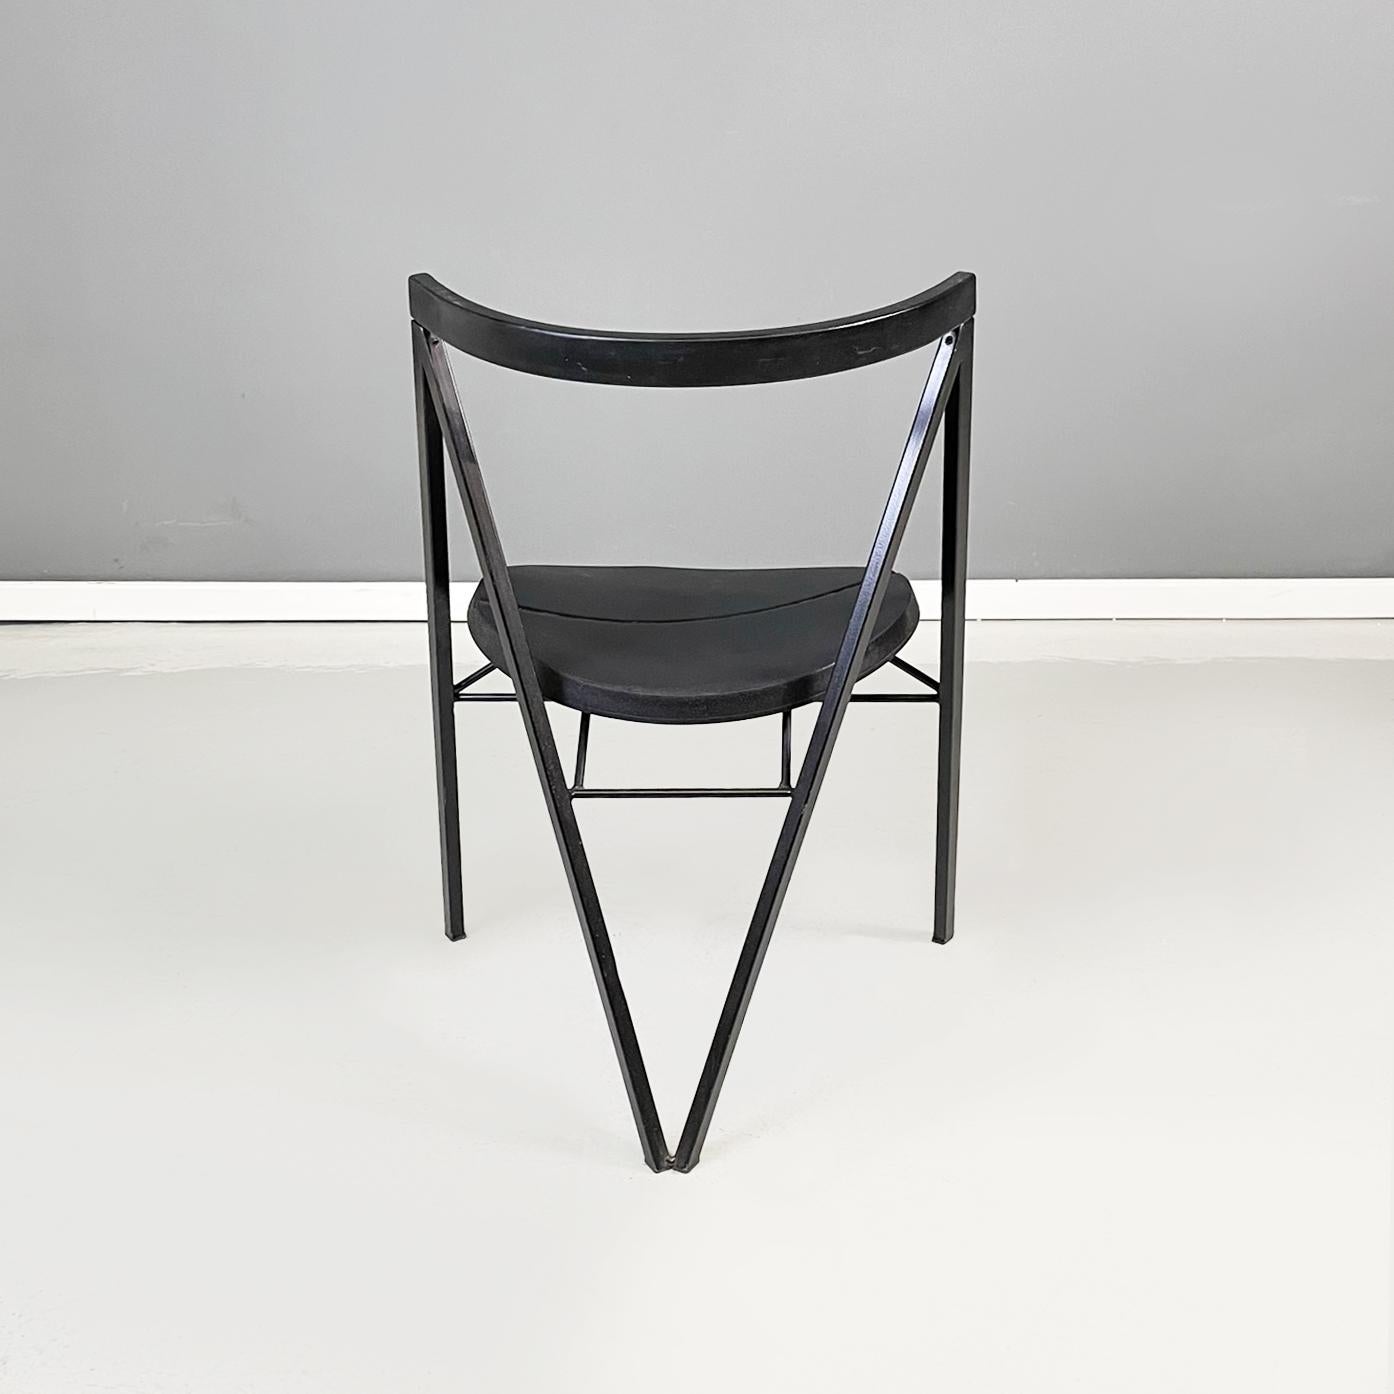 Late 20th Century Italian Modern Black Metal and Rubber Round Chair by Zeus, 1990s For Sale